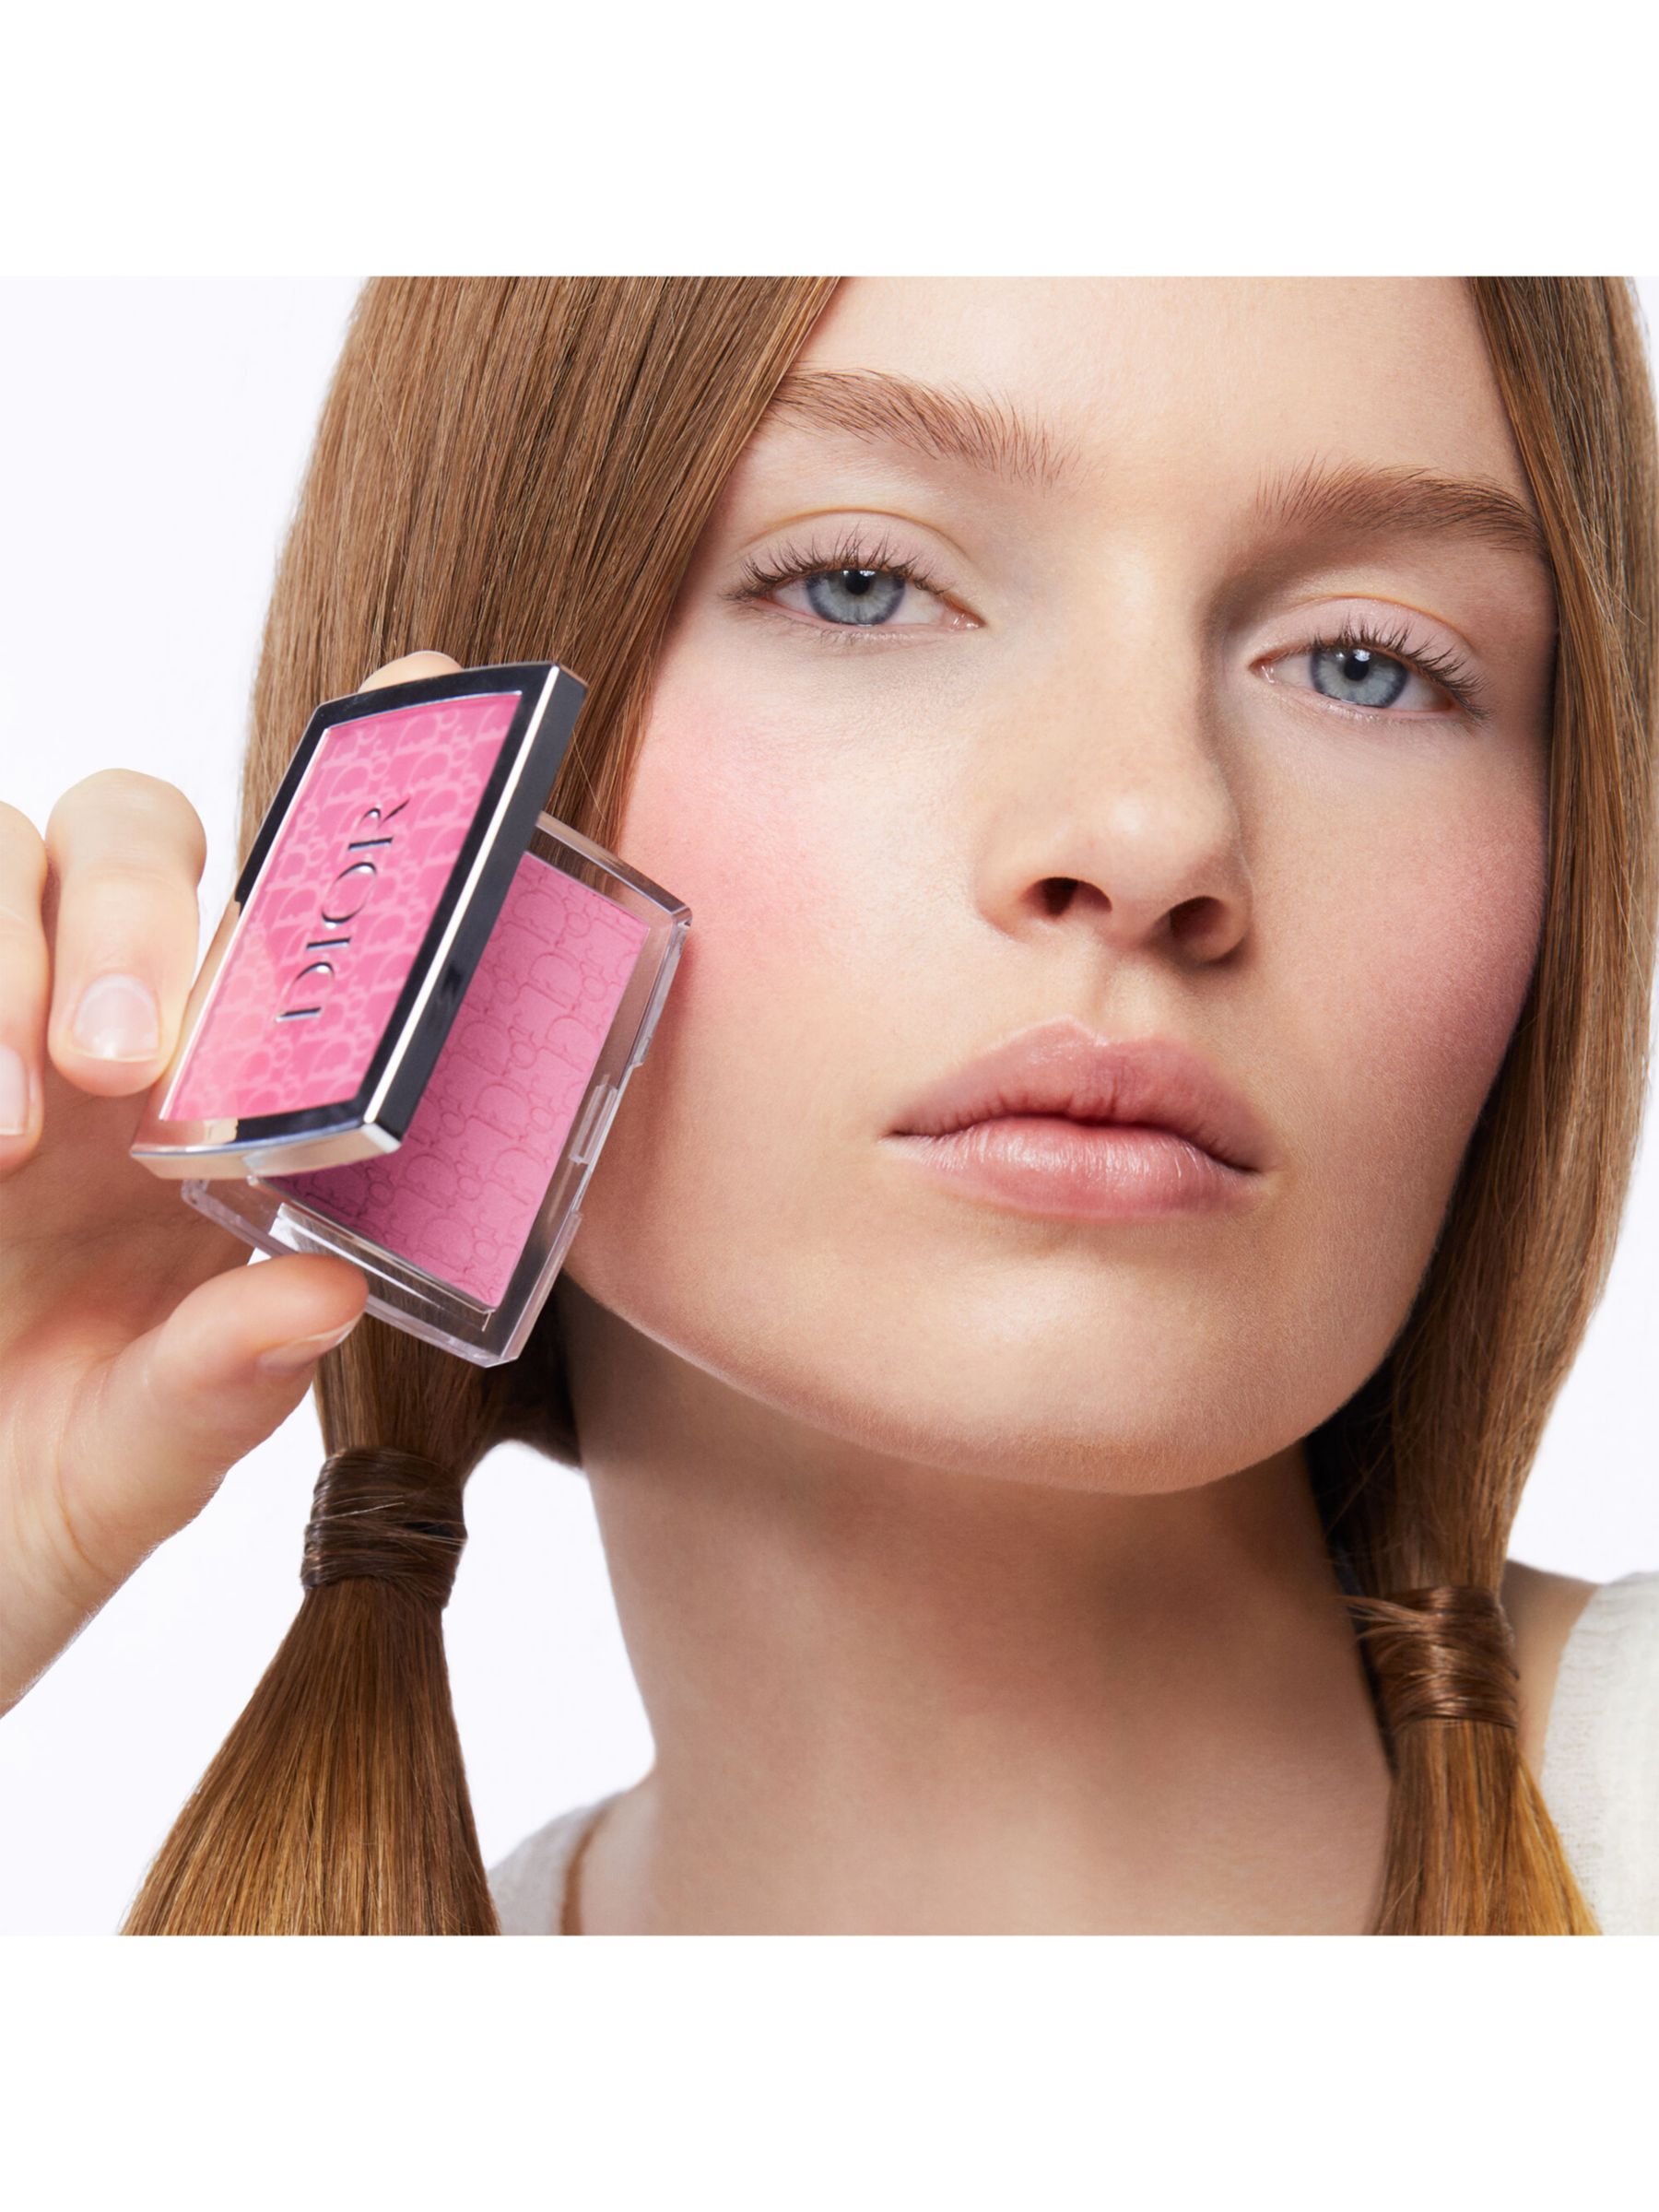 DIOR Backstage Rosy Glow, 001 Pink 8